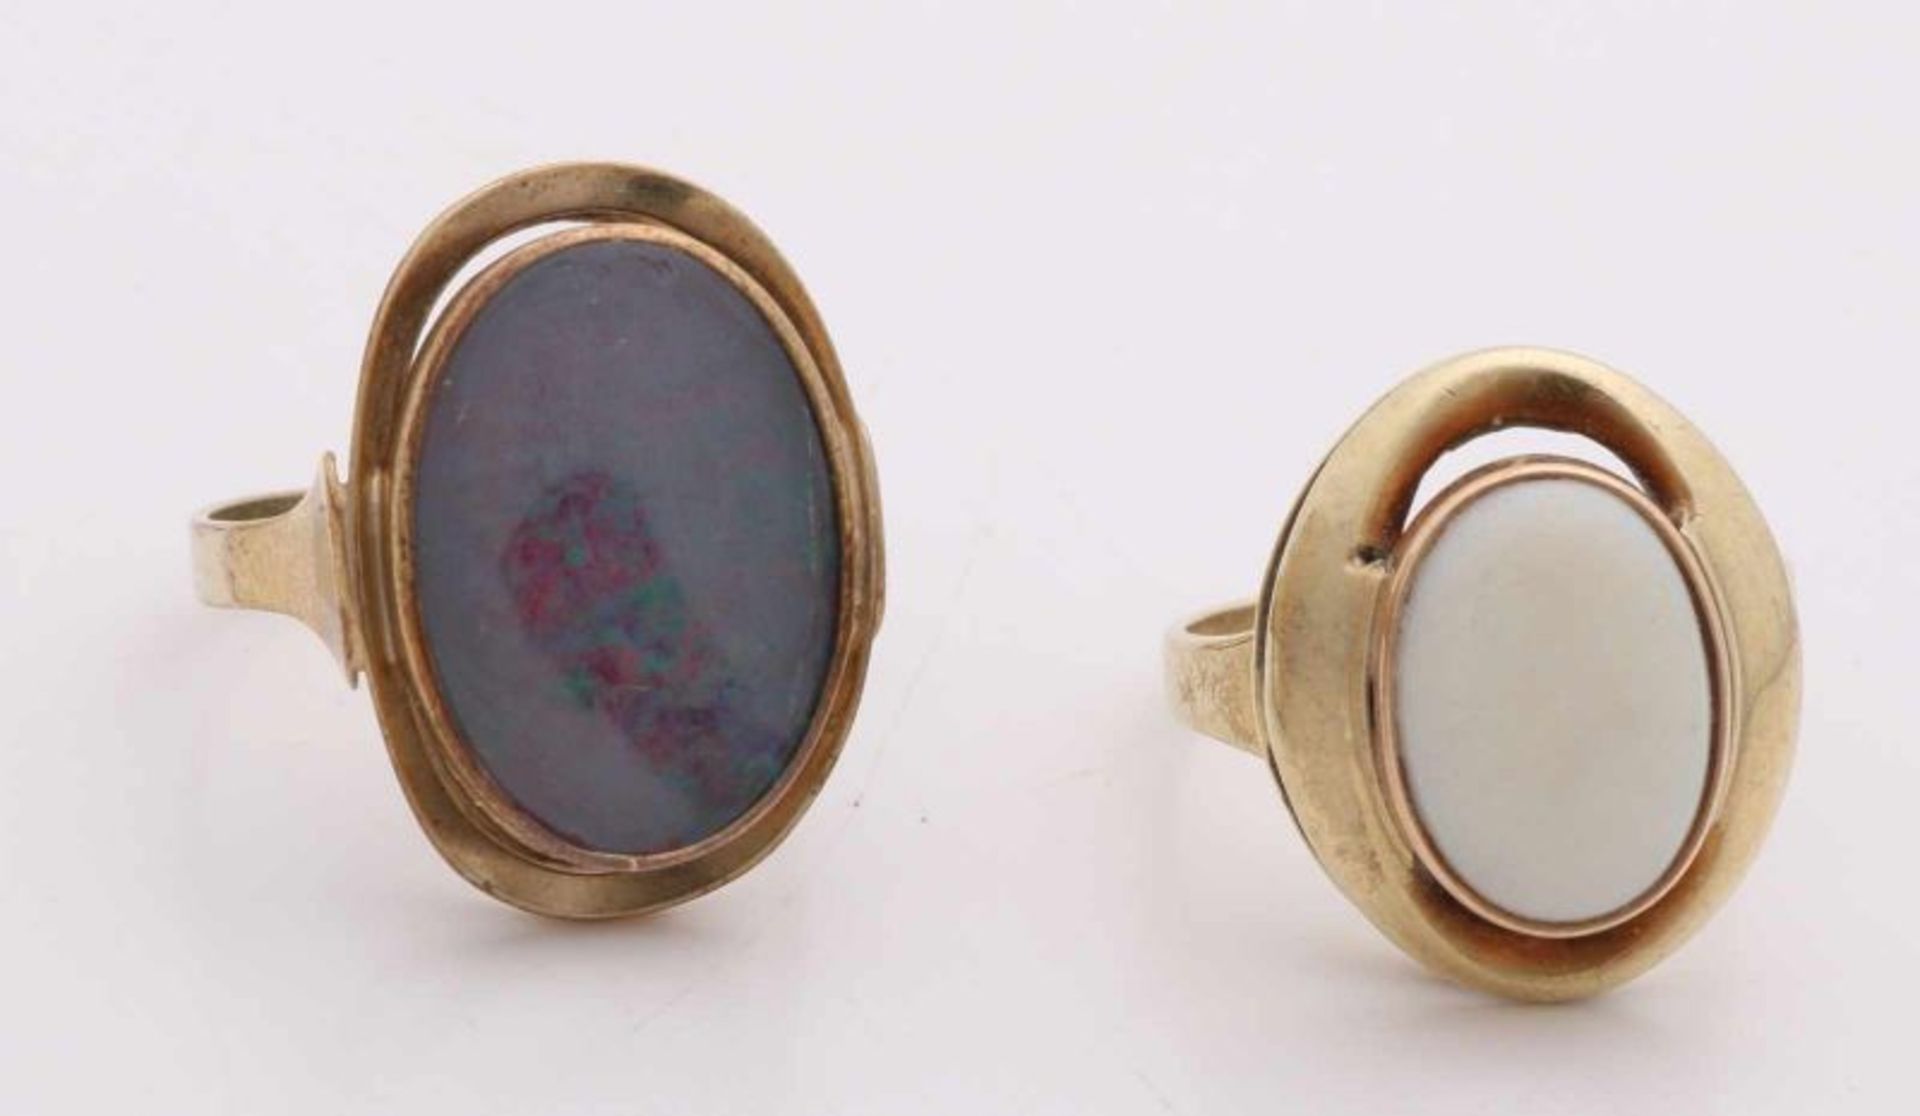 Two gold rings, 585/000, with opal. A ring with a large oval closet with openings on the top and